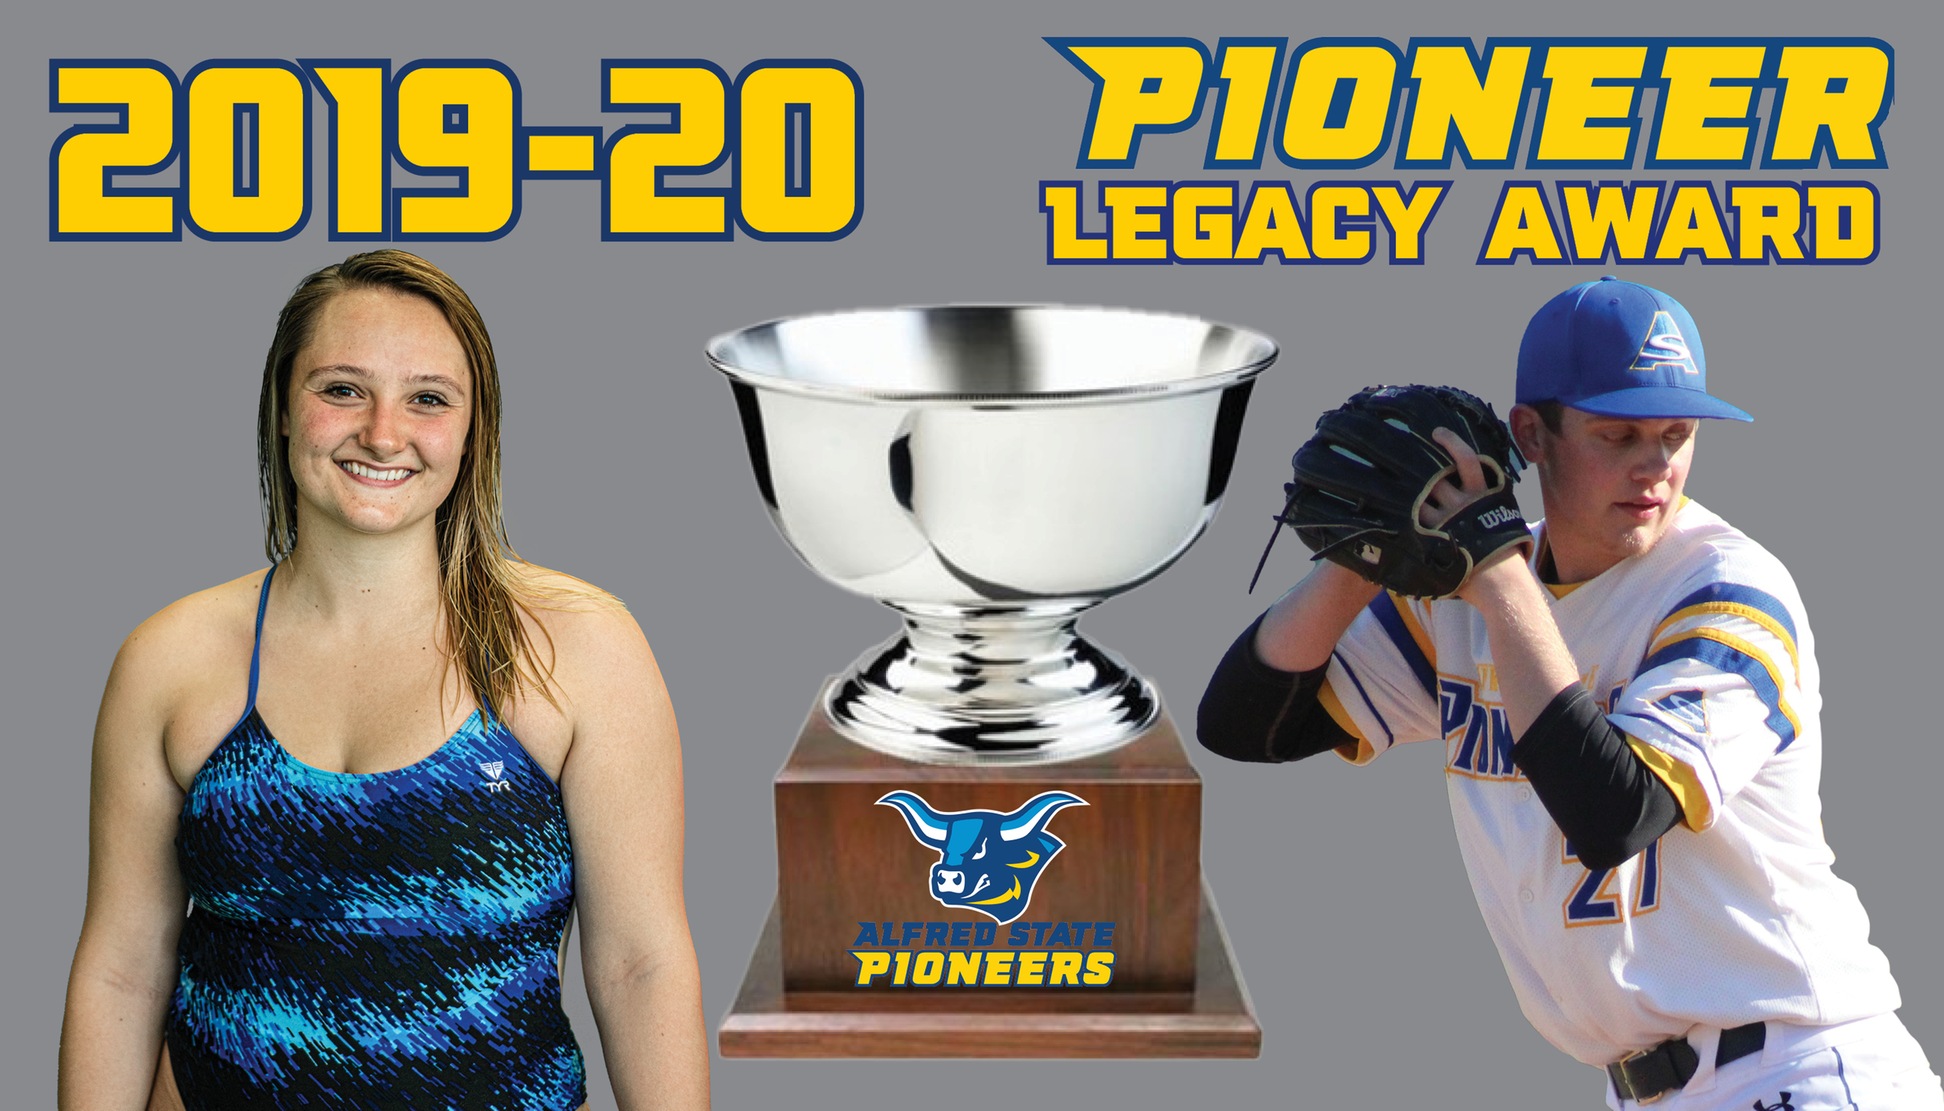 Sarah Stevens and Jarrod Deaton named the recipients of the 2019-20 Pioneer Legacy Award